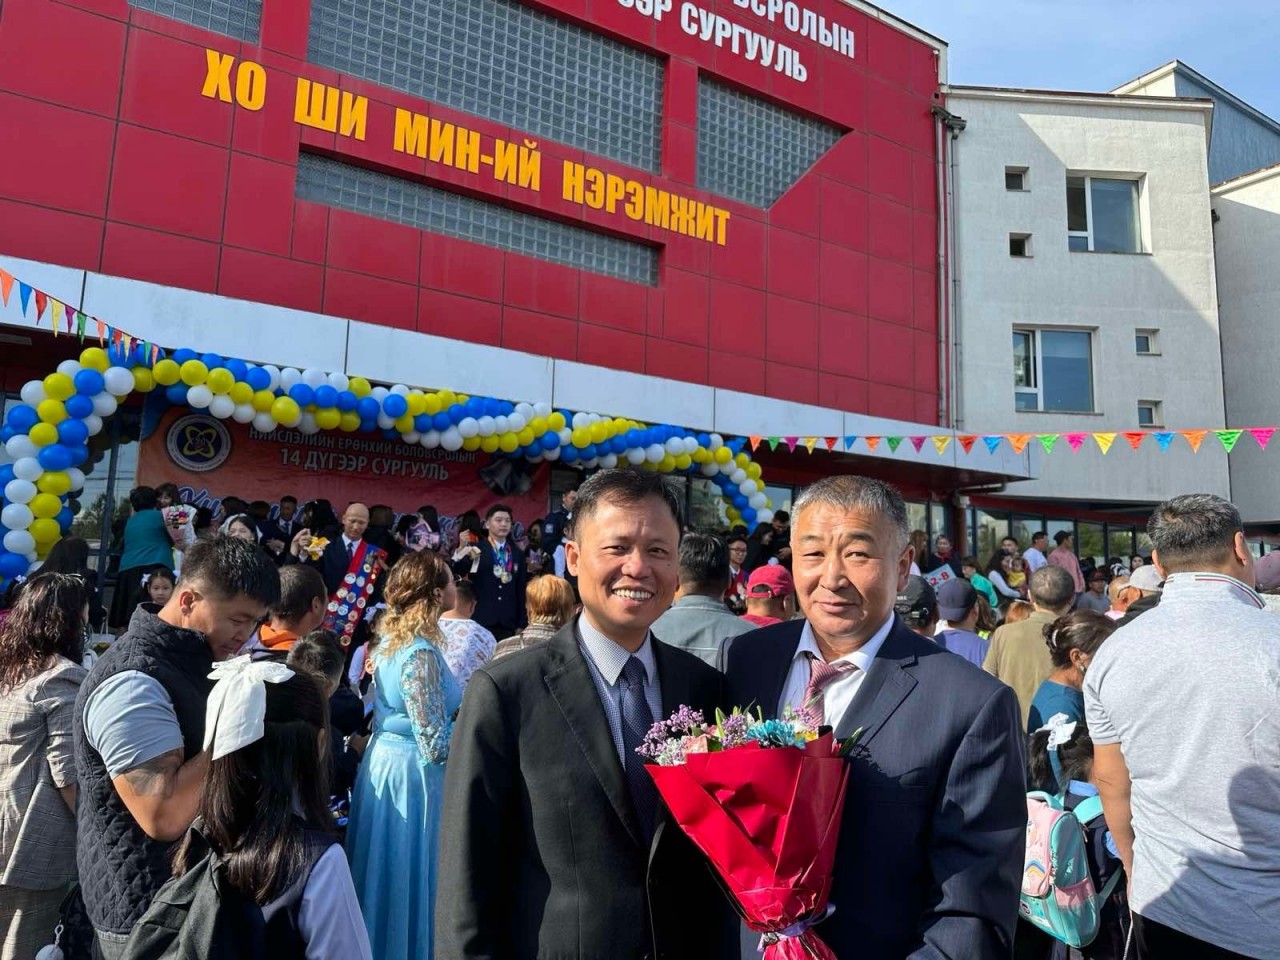 Mongolian President’s state visit is an important milestone in bilateral ties: Ambassador